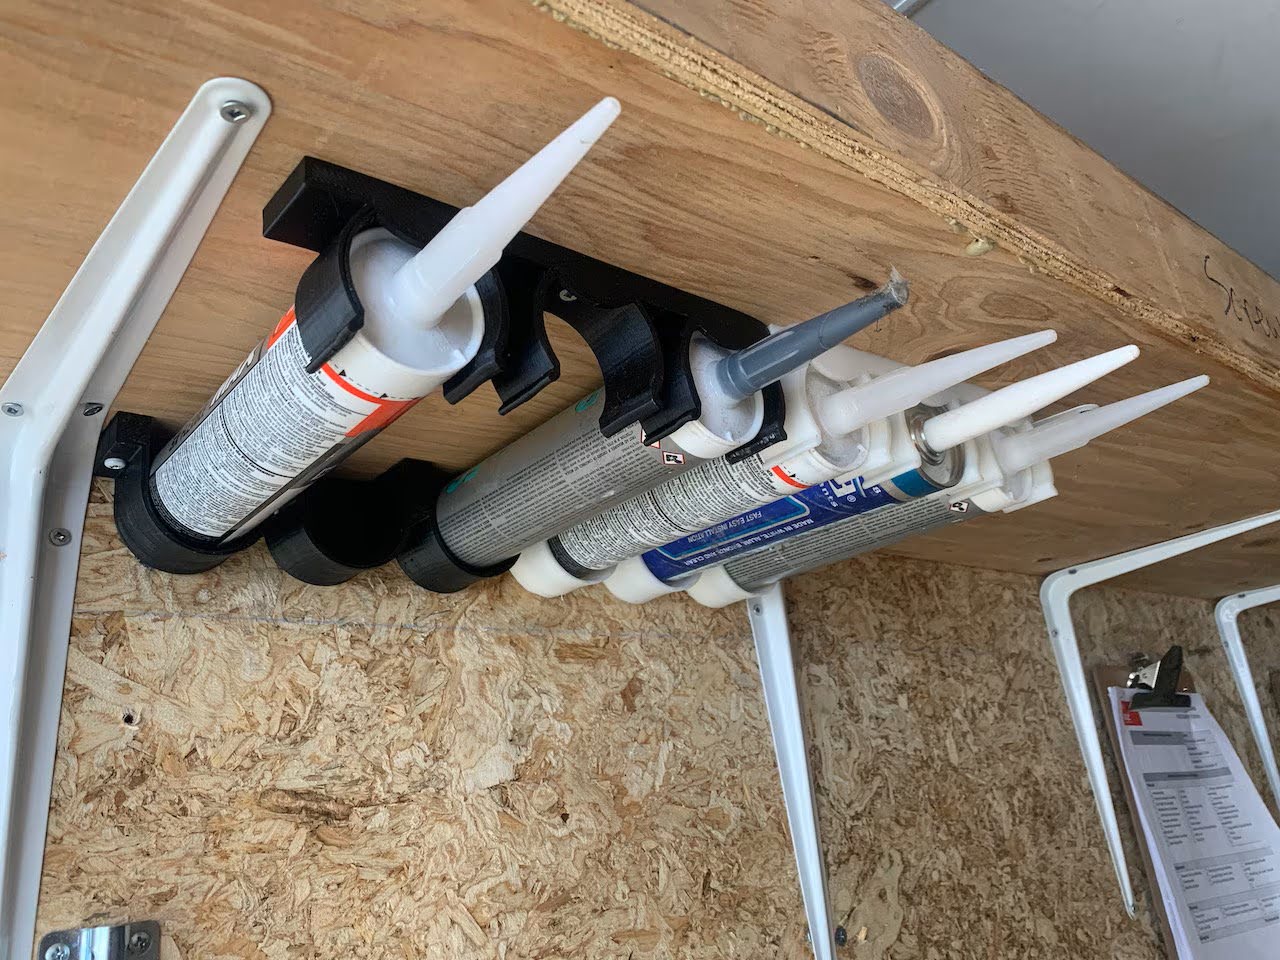 How To Store Caulk After Opening